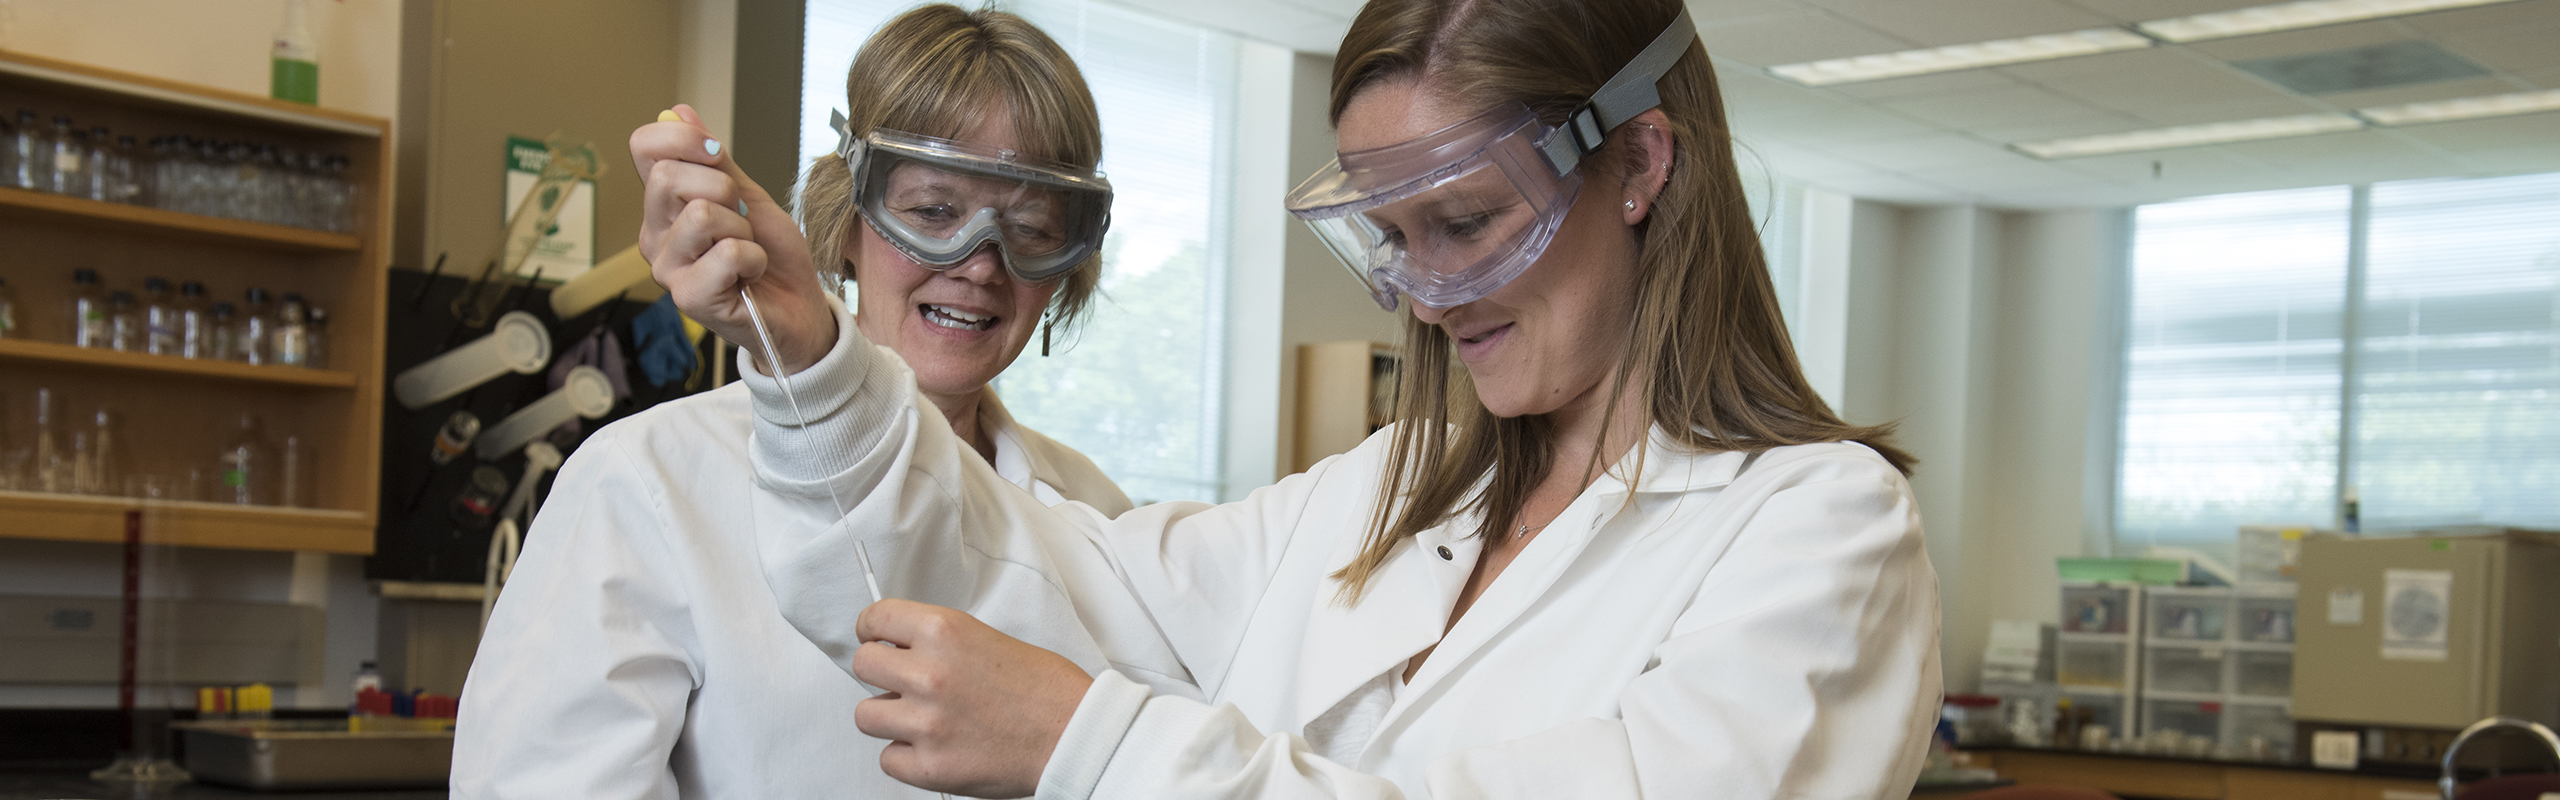 Associate Professor Kathy Matera with student in Chemistry lab